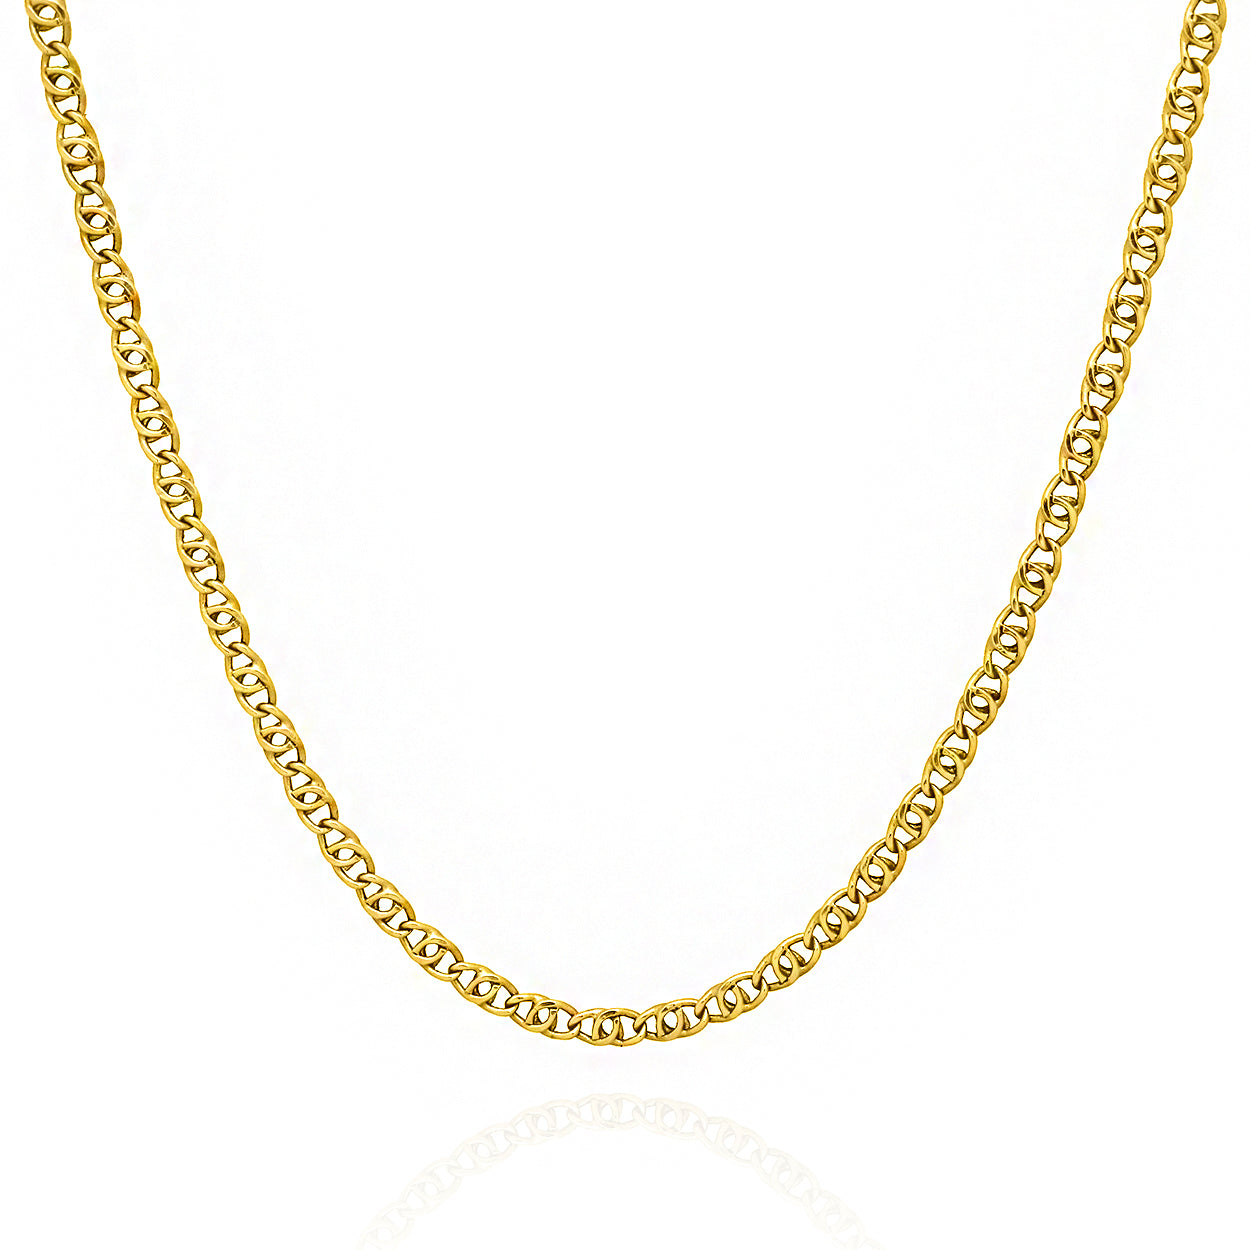 3mm Wide Marine Style Chain Solid Gold Yellow